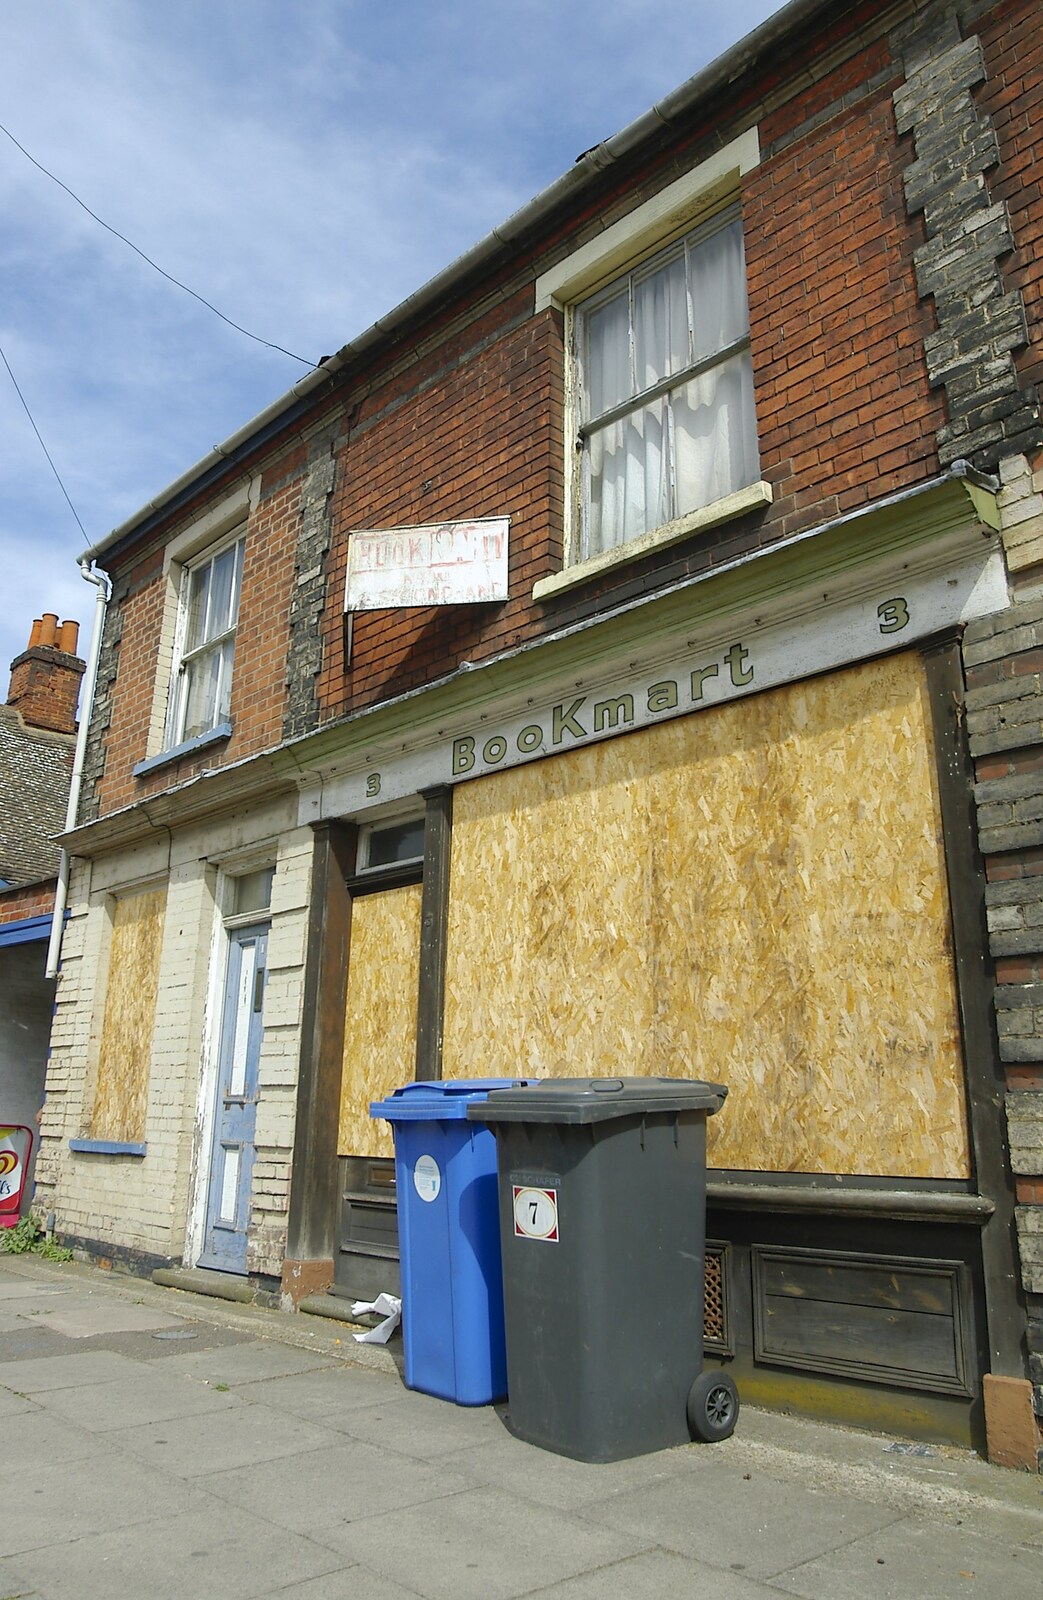 A derelict second-hand bookshop on Fore Street from A Kingston Street Barbeque with Rachel and Sam, North Romsey, Cambridge- 2nd August 2006